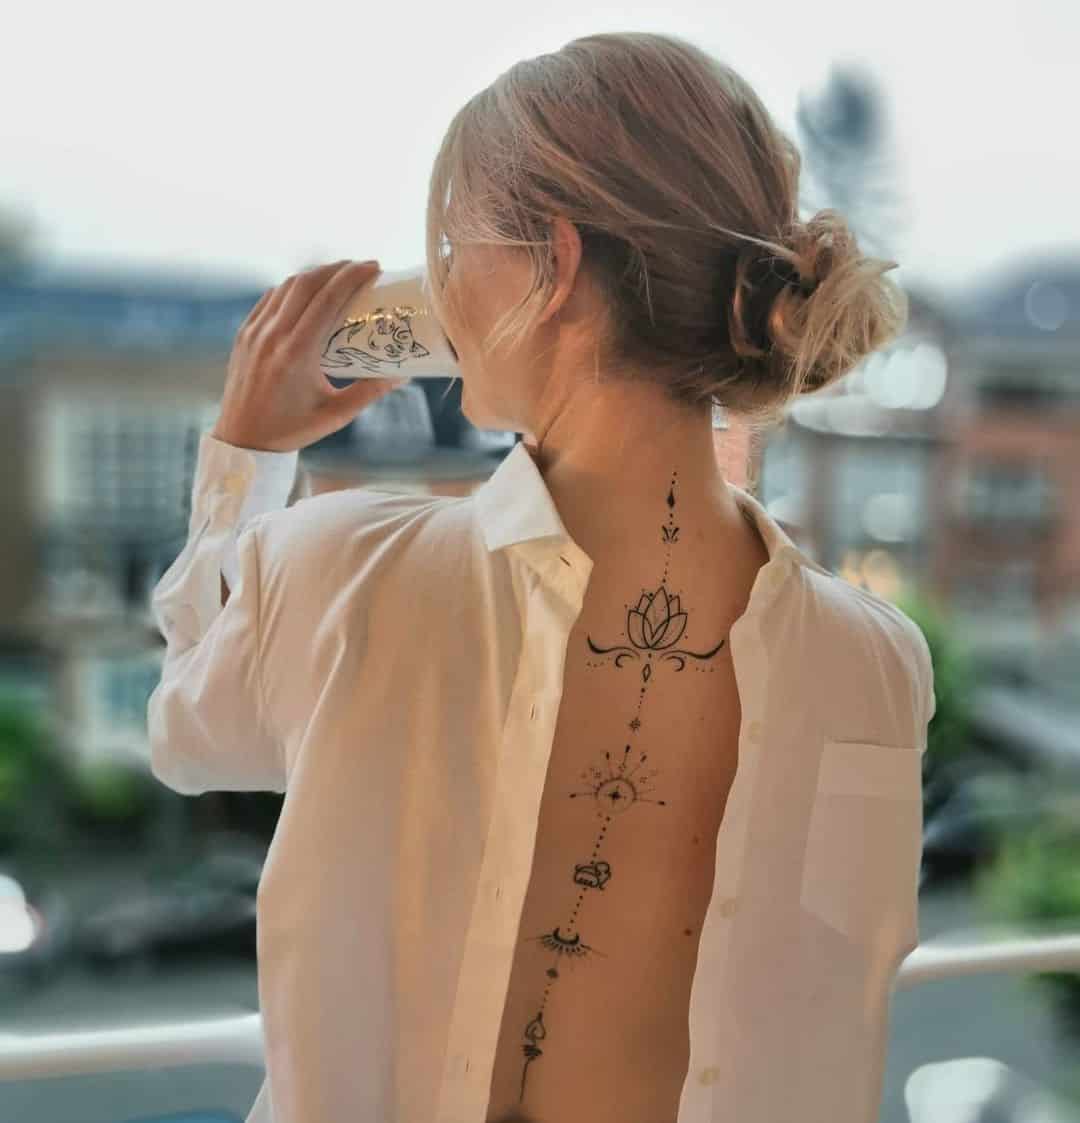 Spine Tattoo Meaning: Delving into Tattoo Meanings and Interpretations